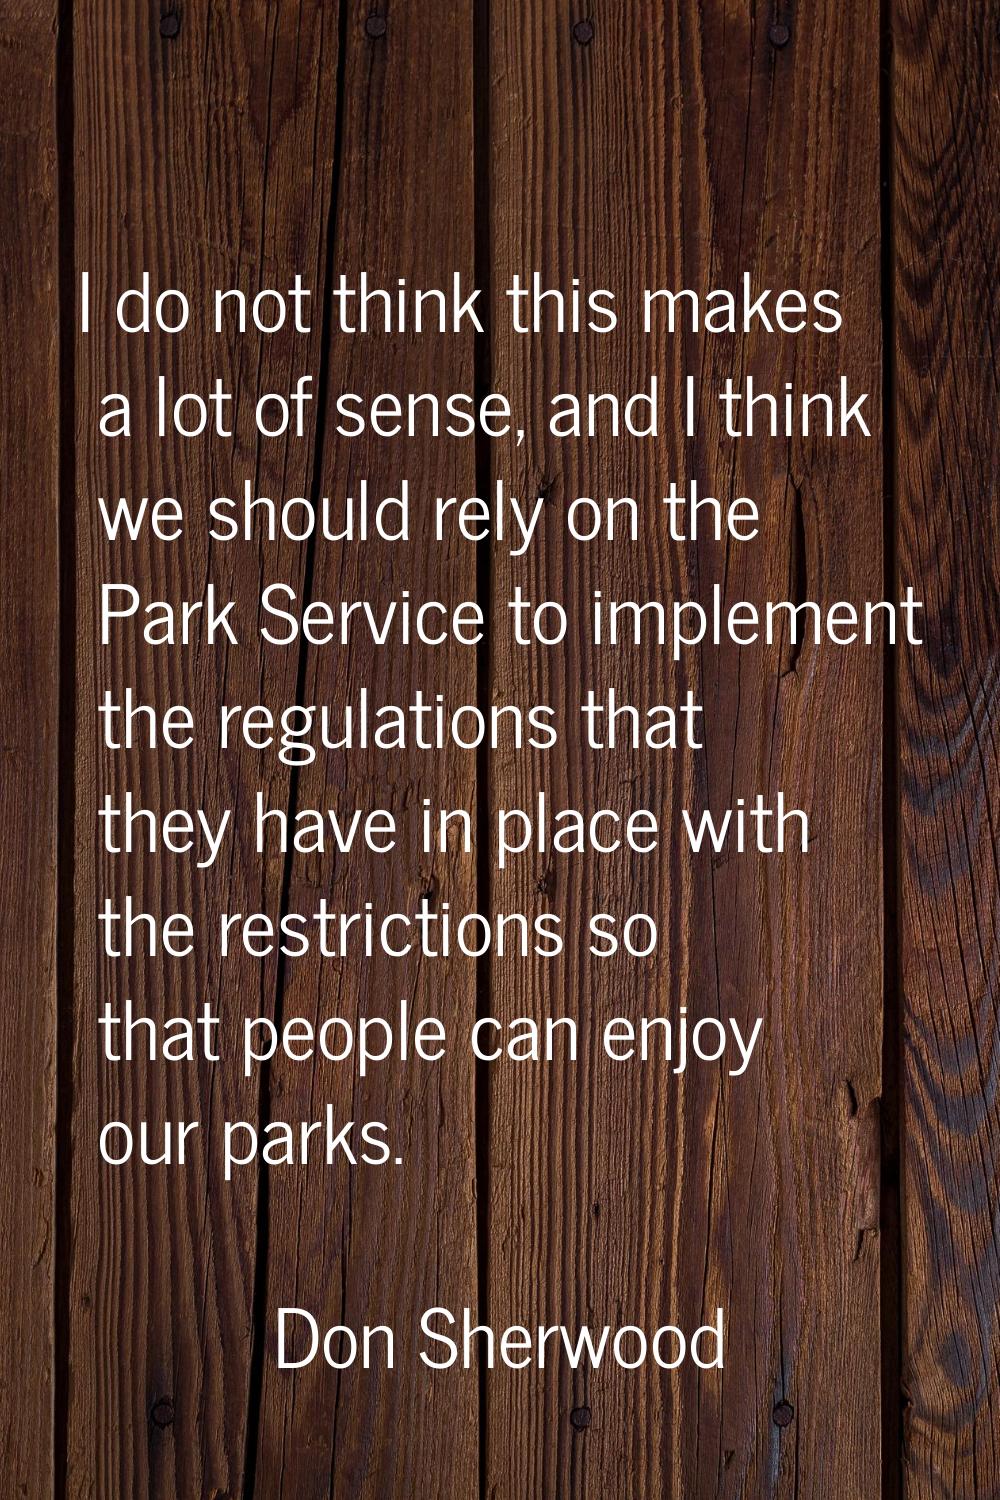 I do not think this makes a lot of sense, and I think we should rely on the Park Service to impleme